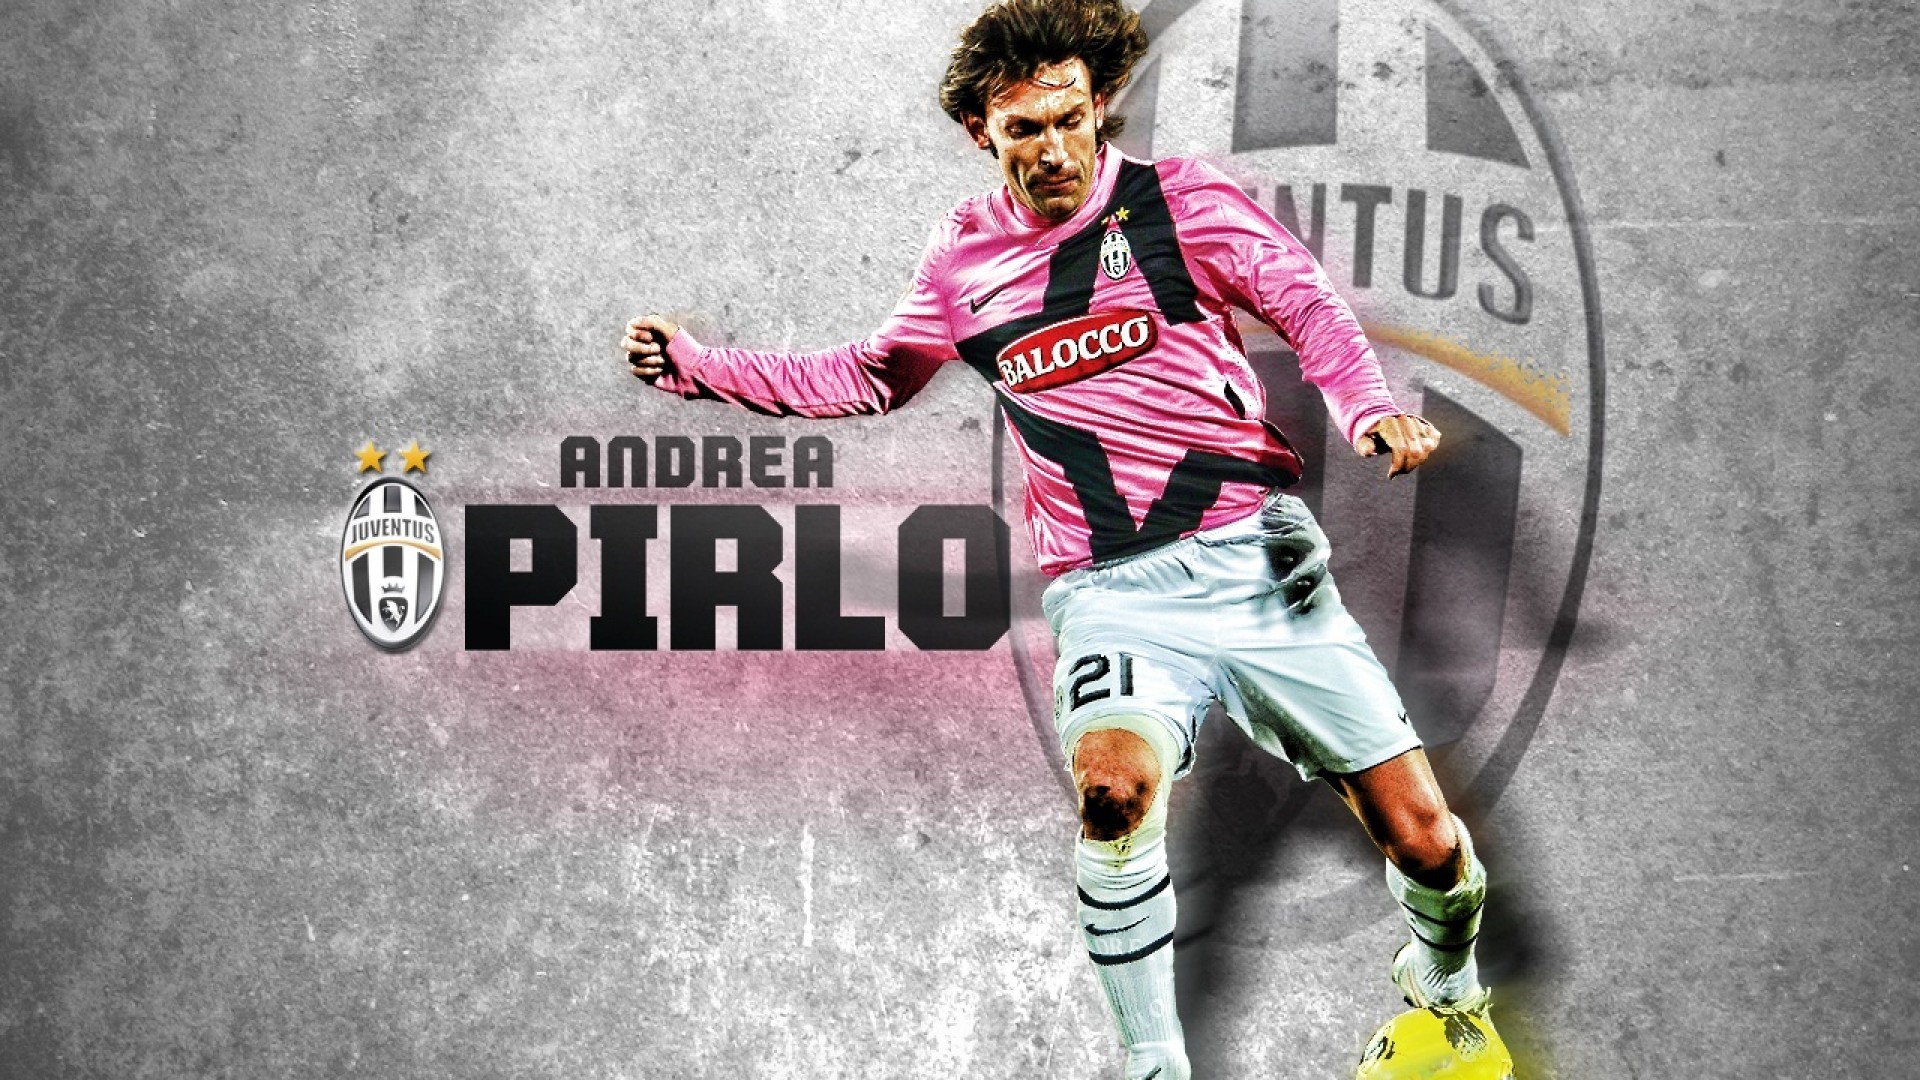 Pirlo Wallpapers